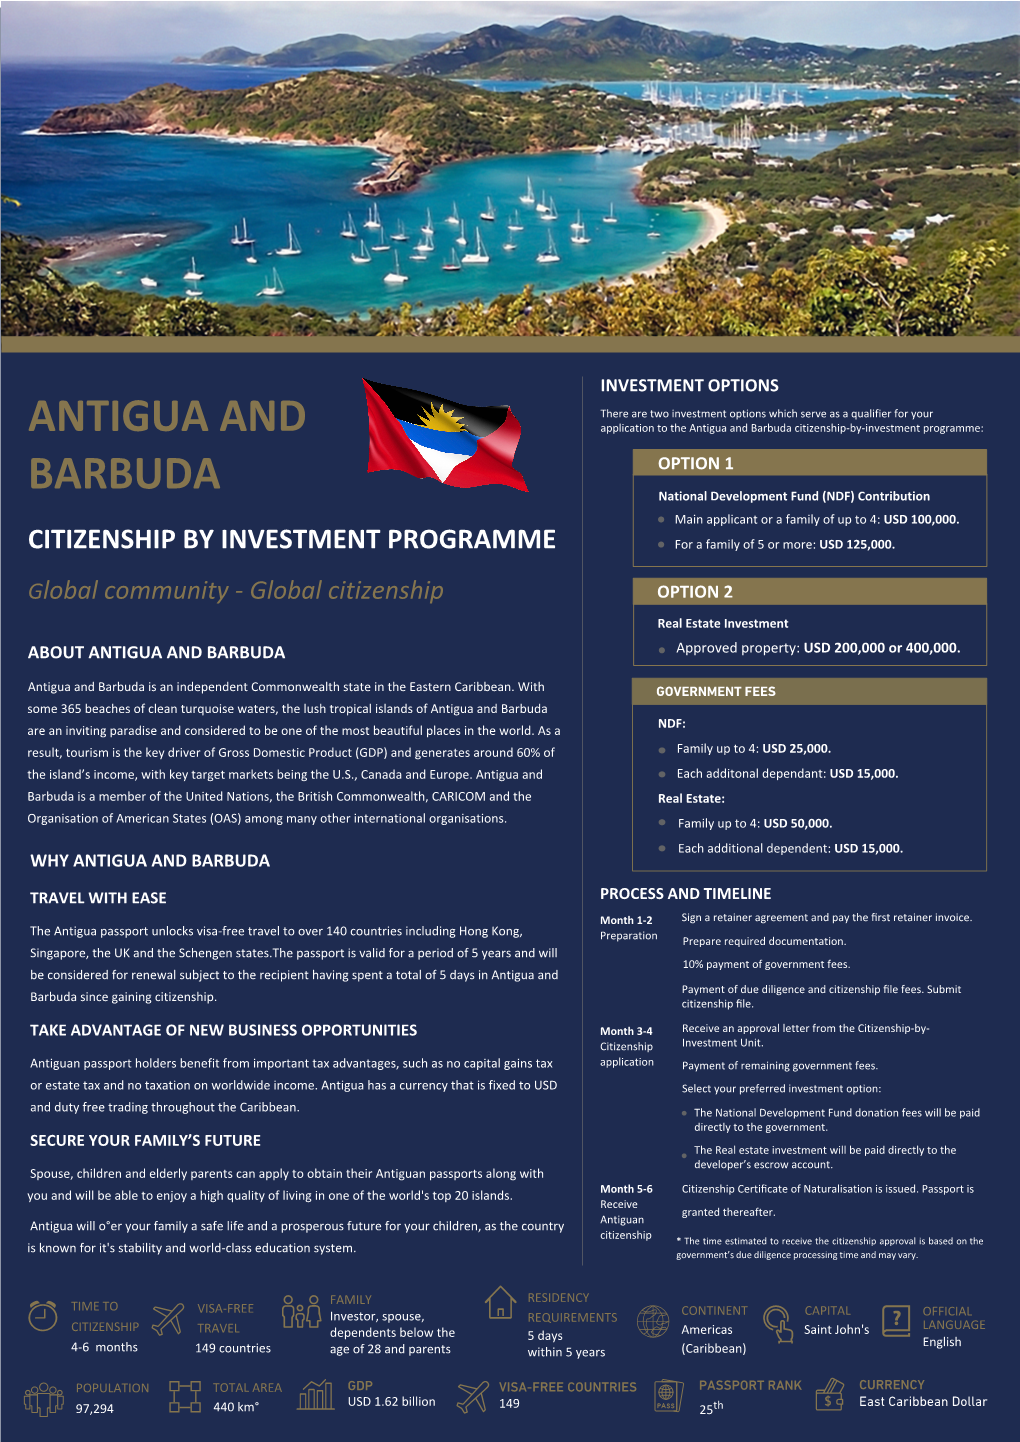 Antigua and Barbuda Citizenship-By-Investment Programme: OPTION 1